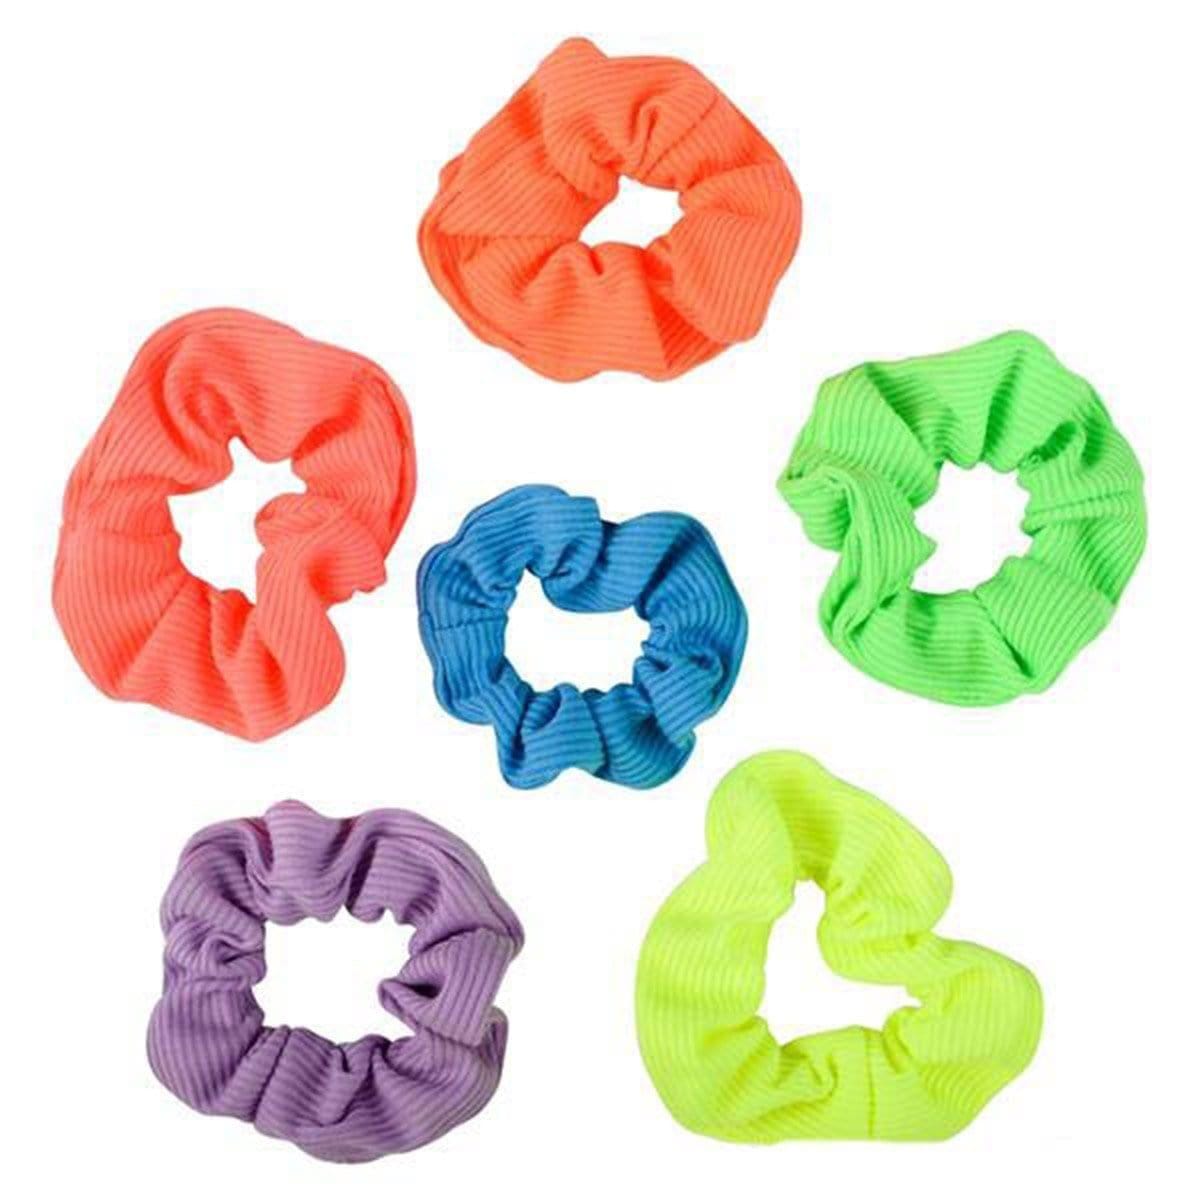 Buy Novelties Neon Scrunchie, 2 Count, Assortment sold at Party Expert